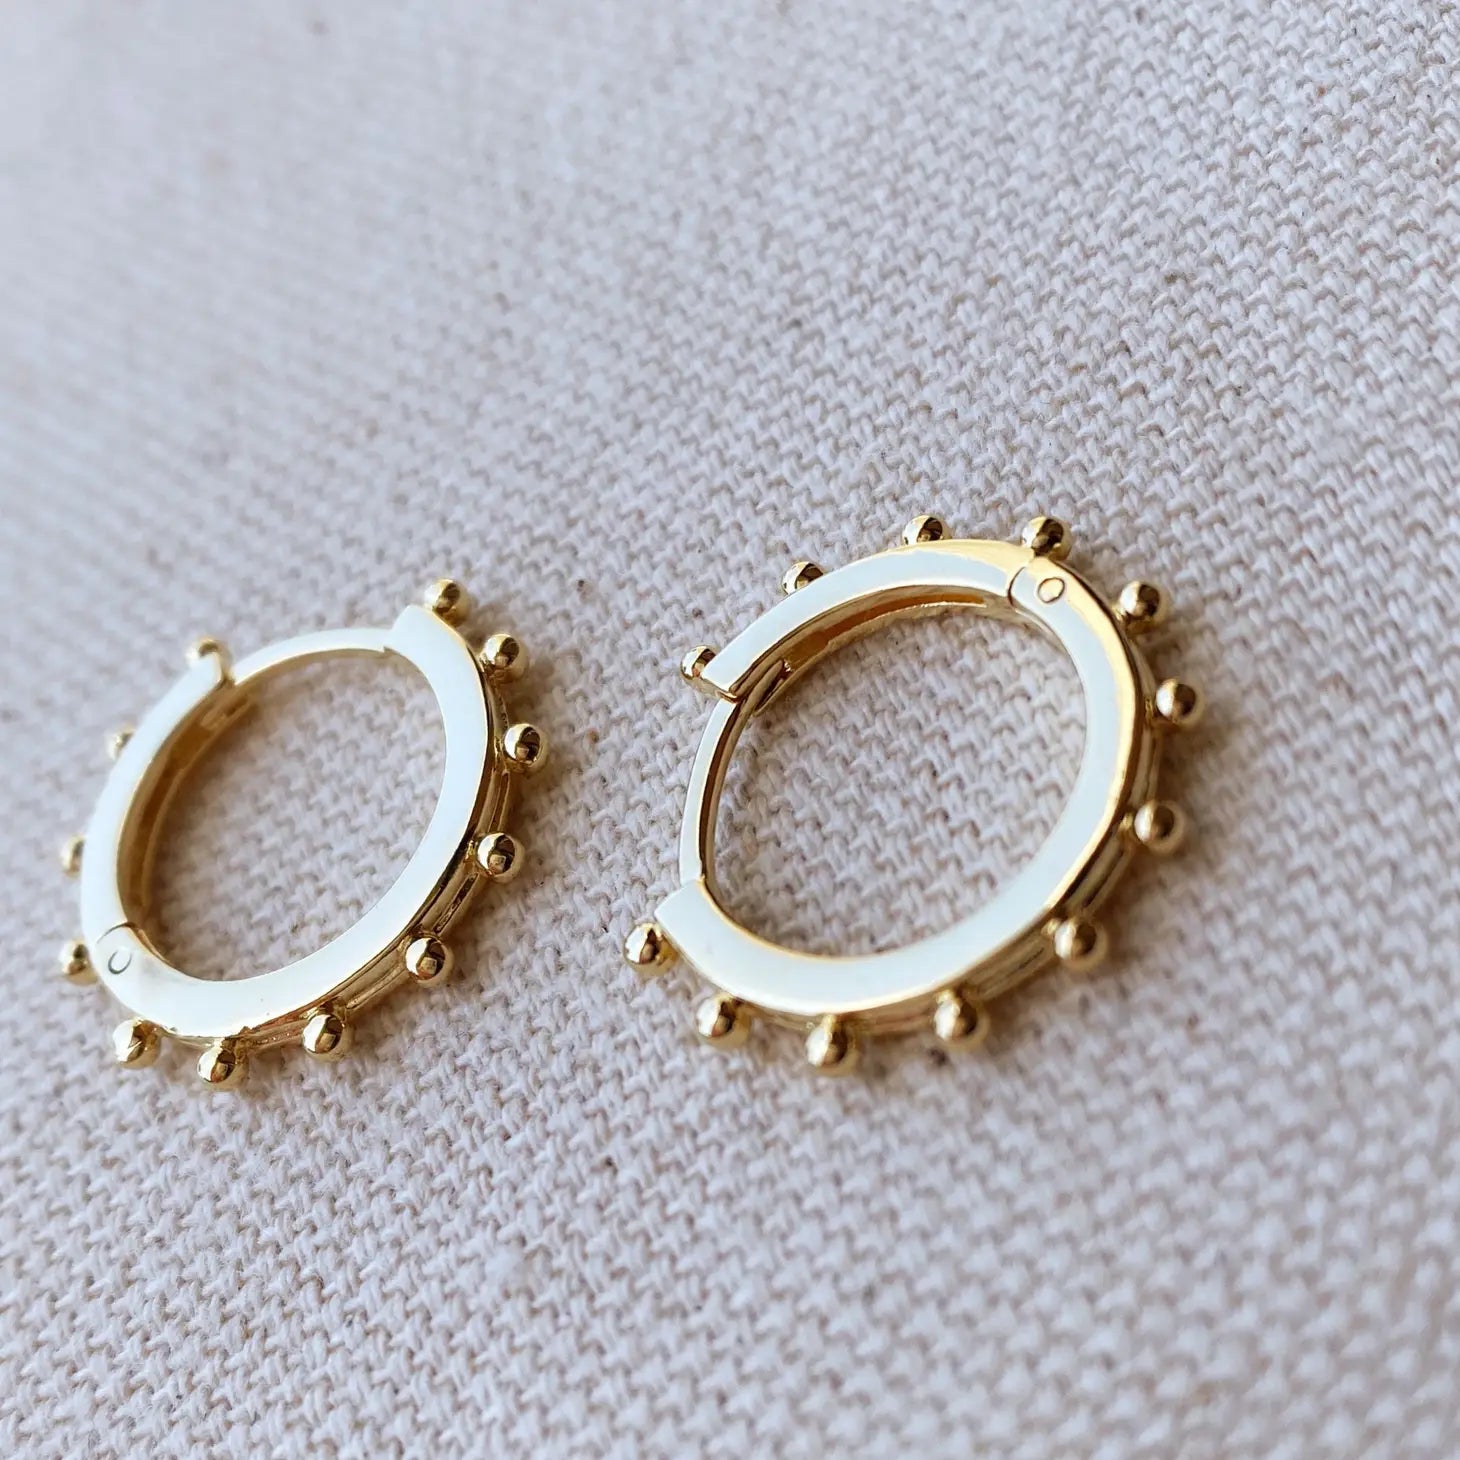 The Candace Hoops, 18k Gold filled hoop earrings with ball detail